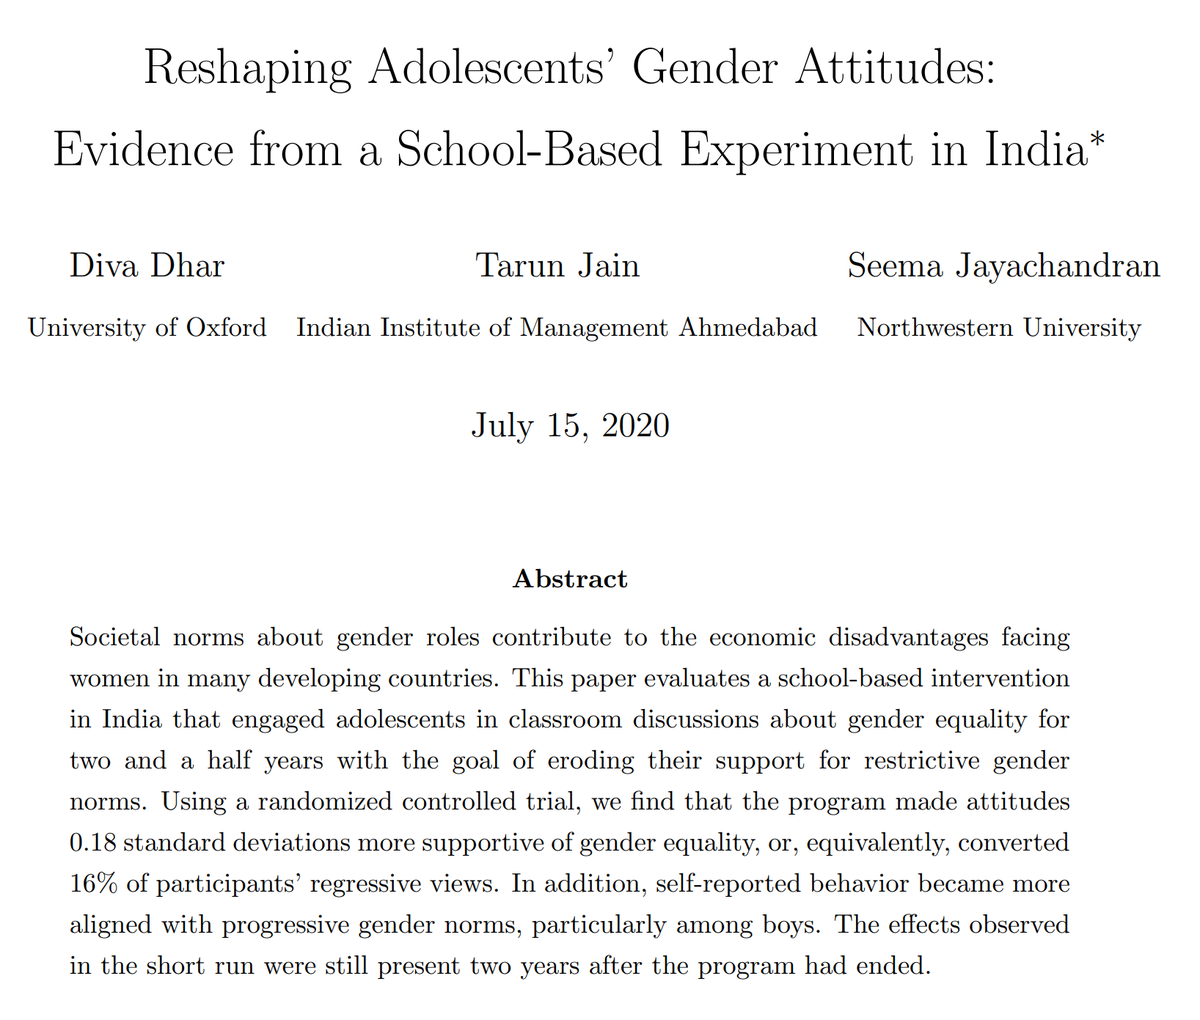 New version of our paper, "Reshaping Adolescents' Gender Attitudes: Evidence from a School-Based Experiment in India." Class discussions on gender equality increased support for gender equality by a lot. The effect was still present 2 years later.  http://bit.ly/2QGHIGu 